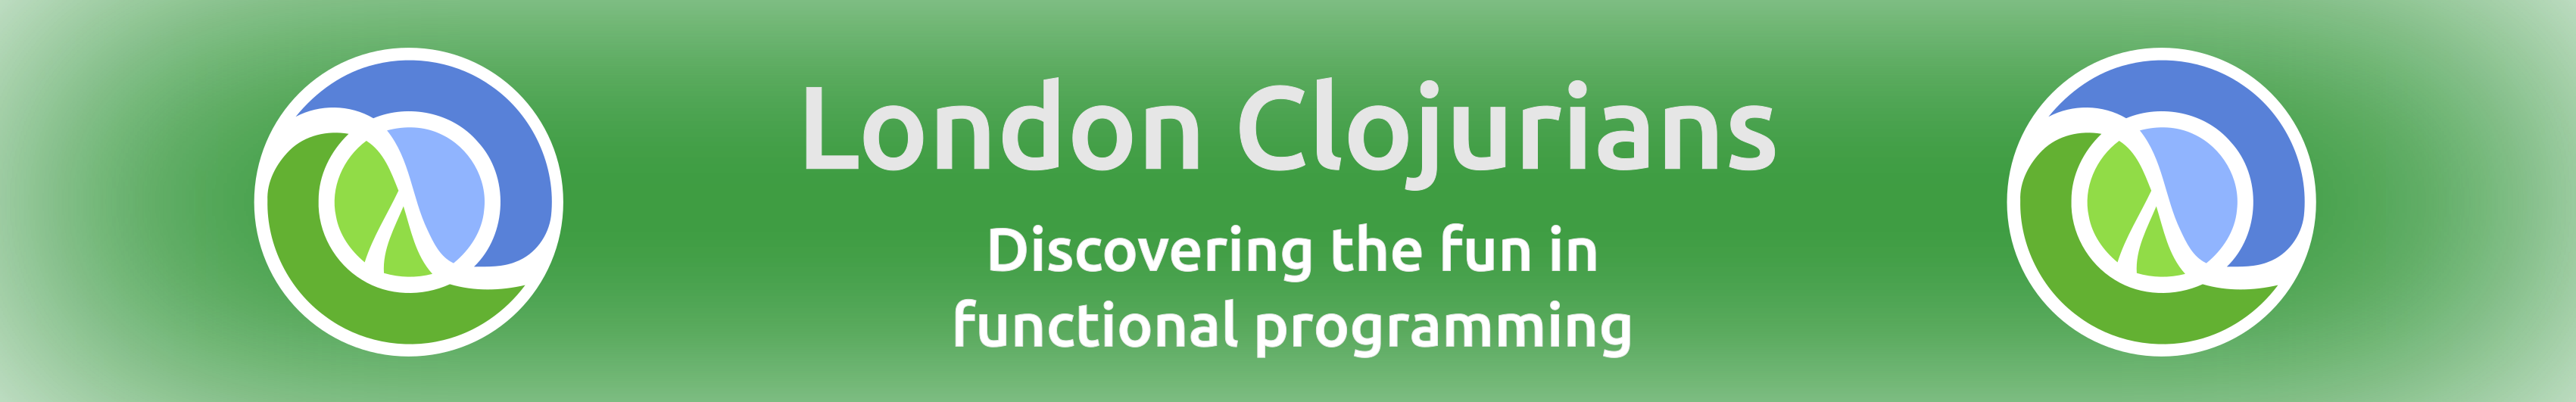 Join in the fun of functional programming with the London Clojurians